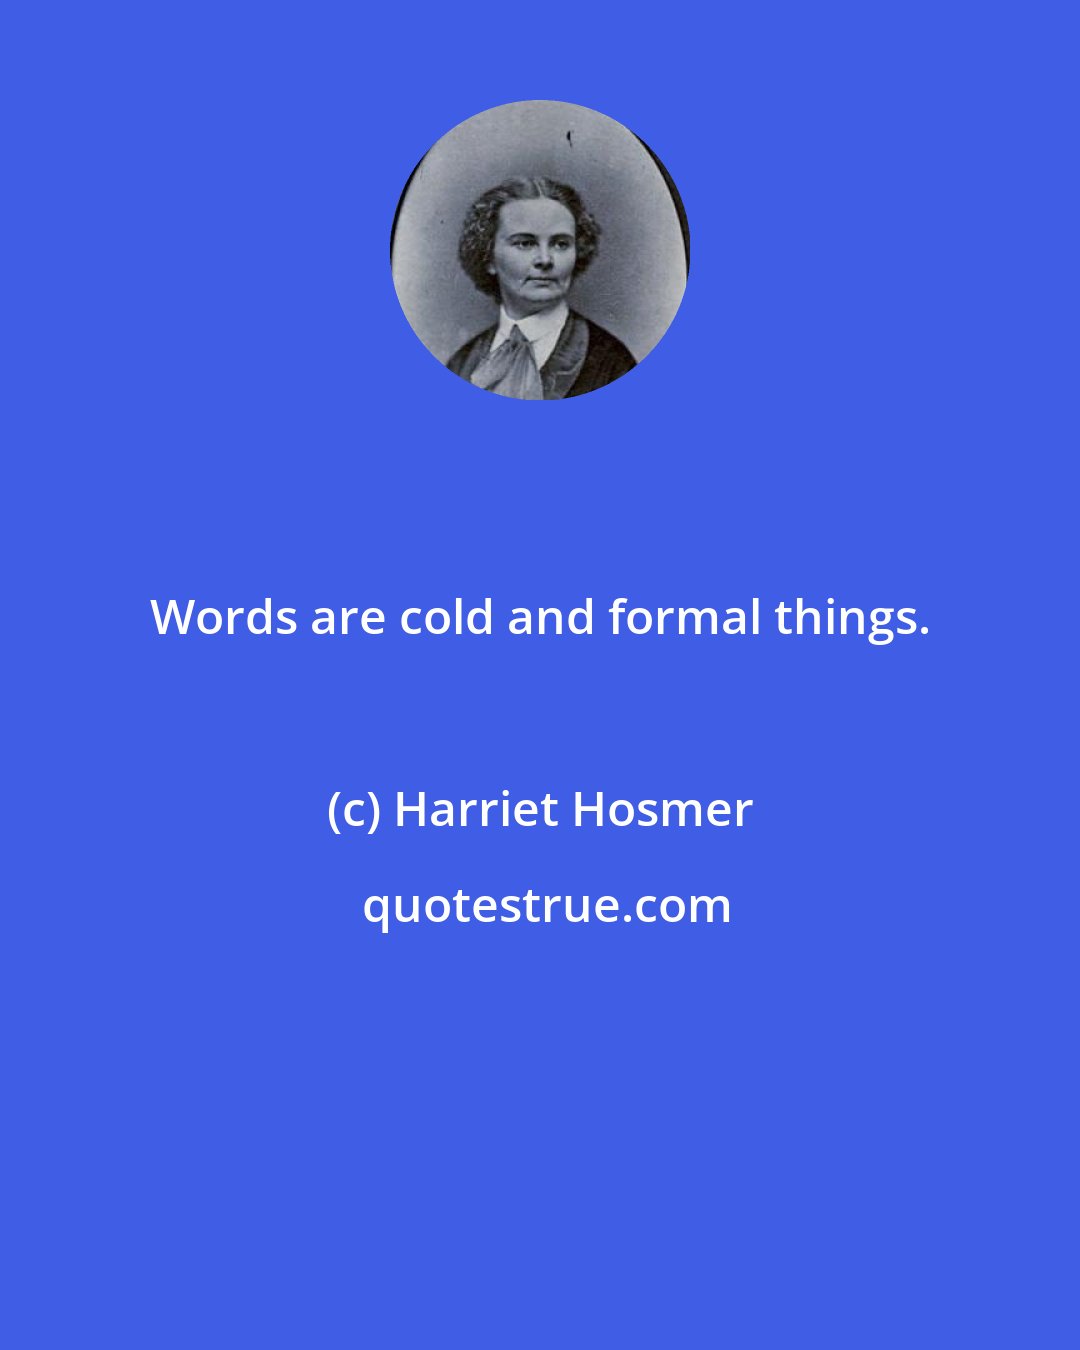 Harriet Hosmer: Words are cold and formal things.